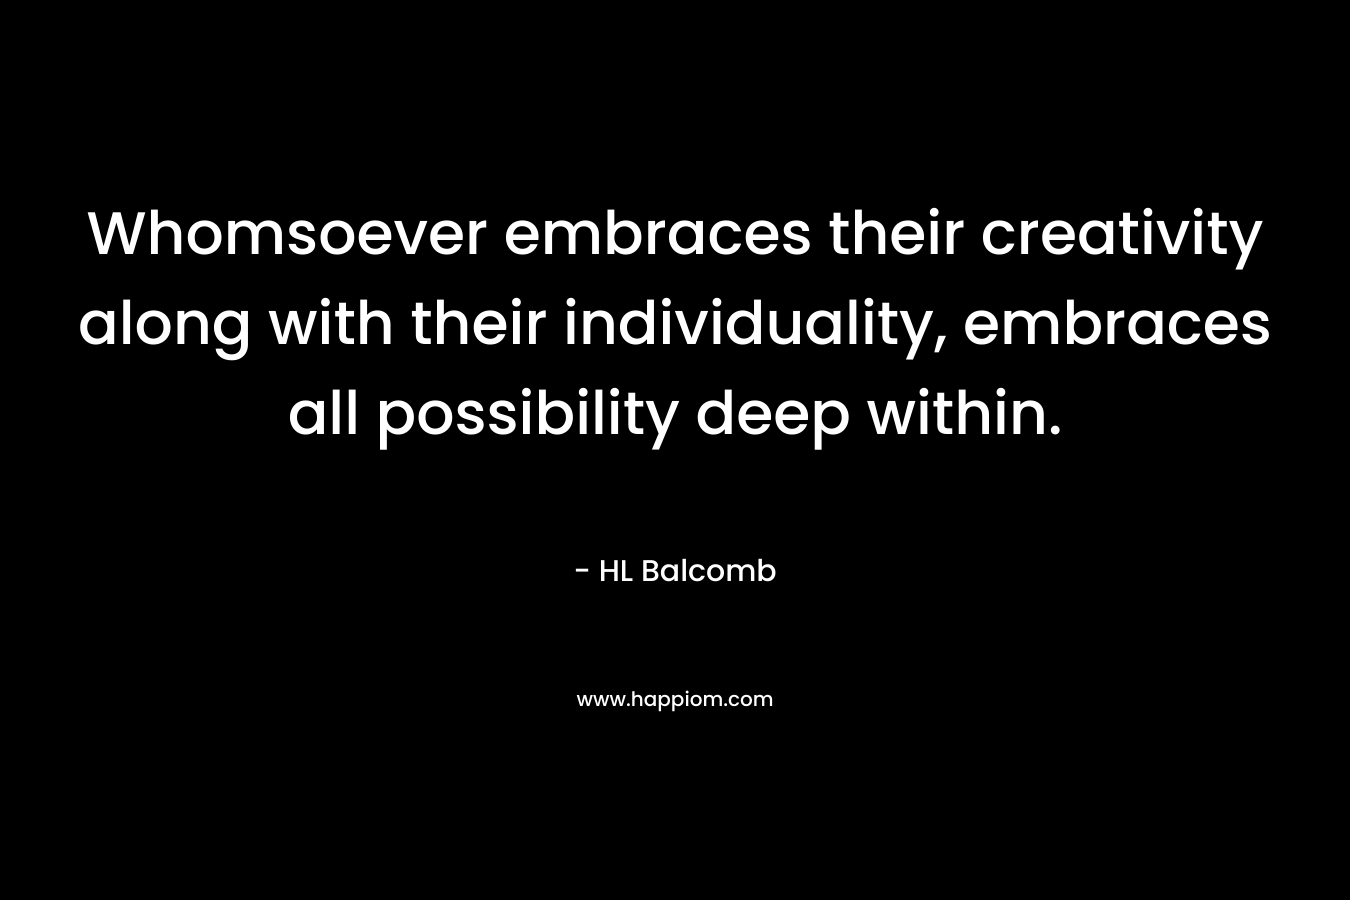 Whomsoever embraces their creativity along with their individuality, embraces all possibility deep within. – HL Balcomb